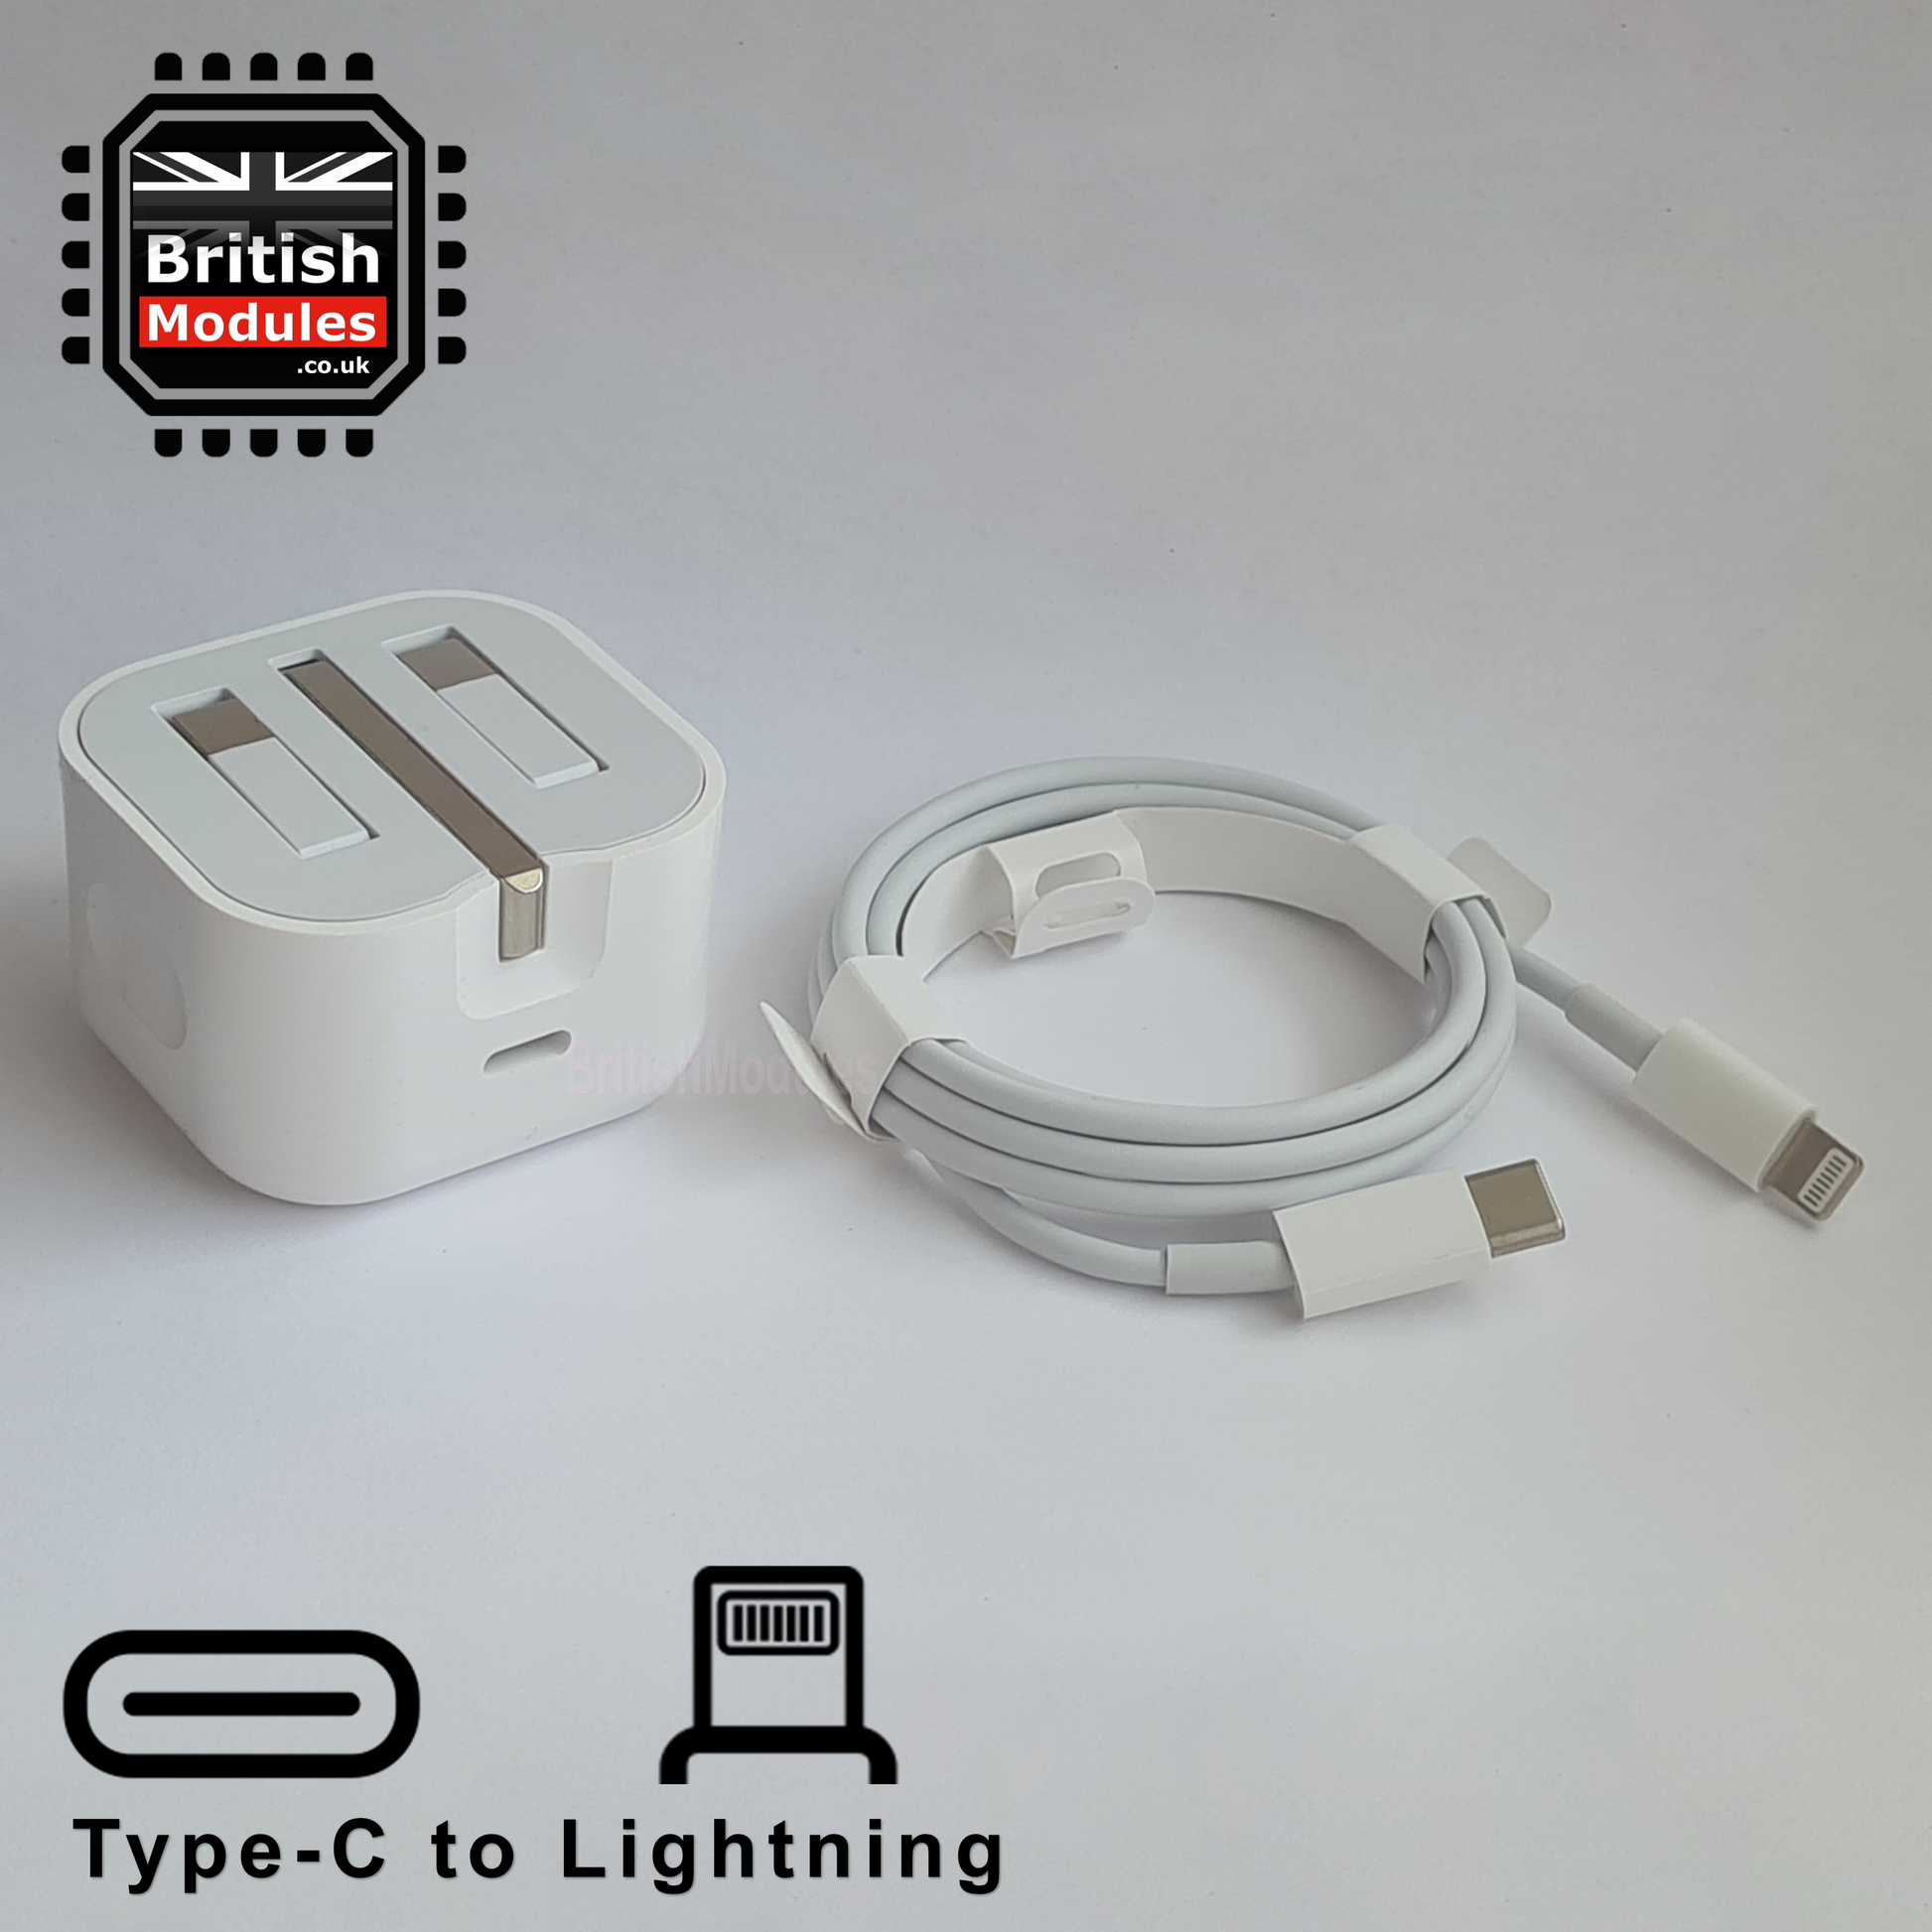 iPhone Charger & Cable: Lightning USB & Power Adapter